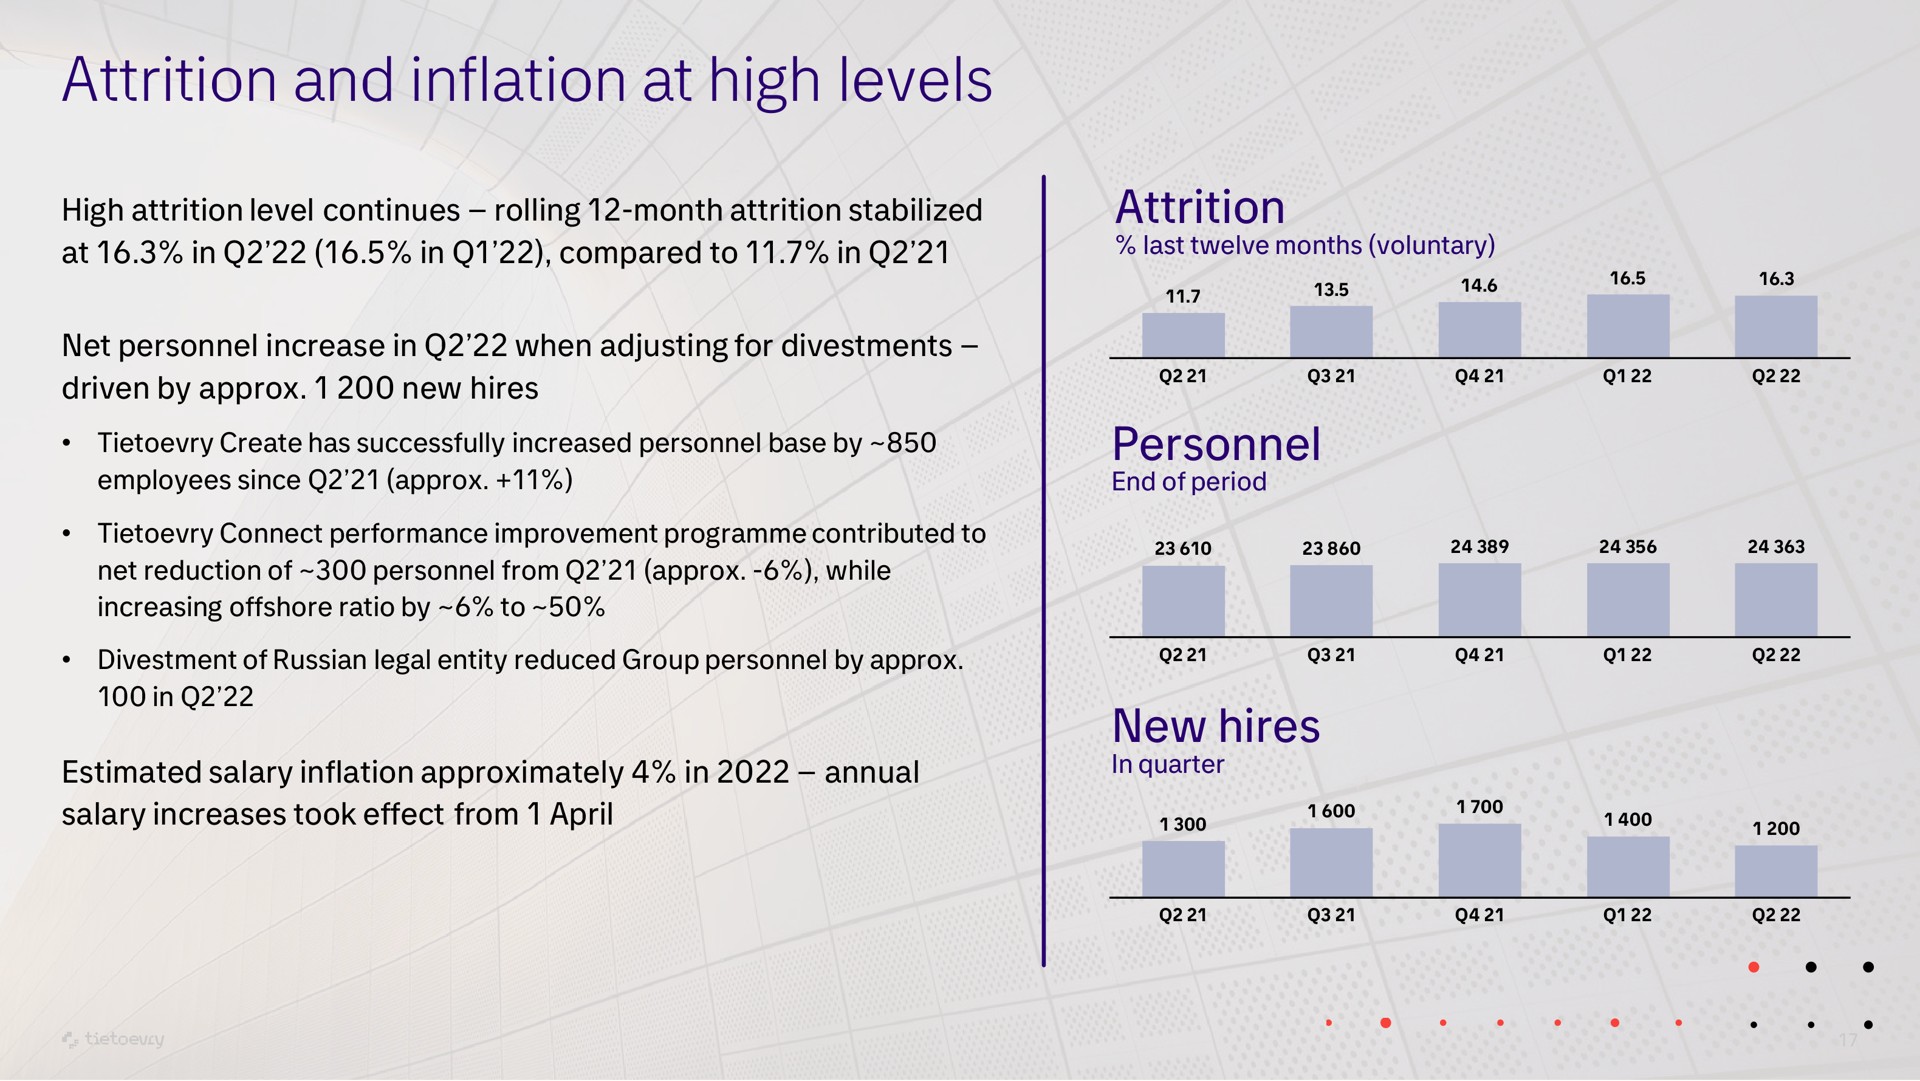 attrition and inflation at high levels | Tietoevry